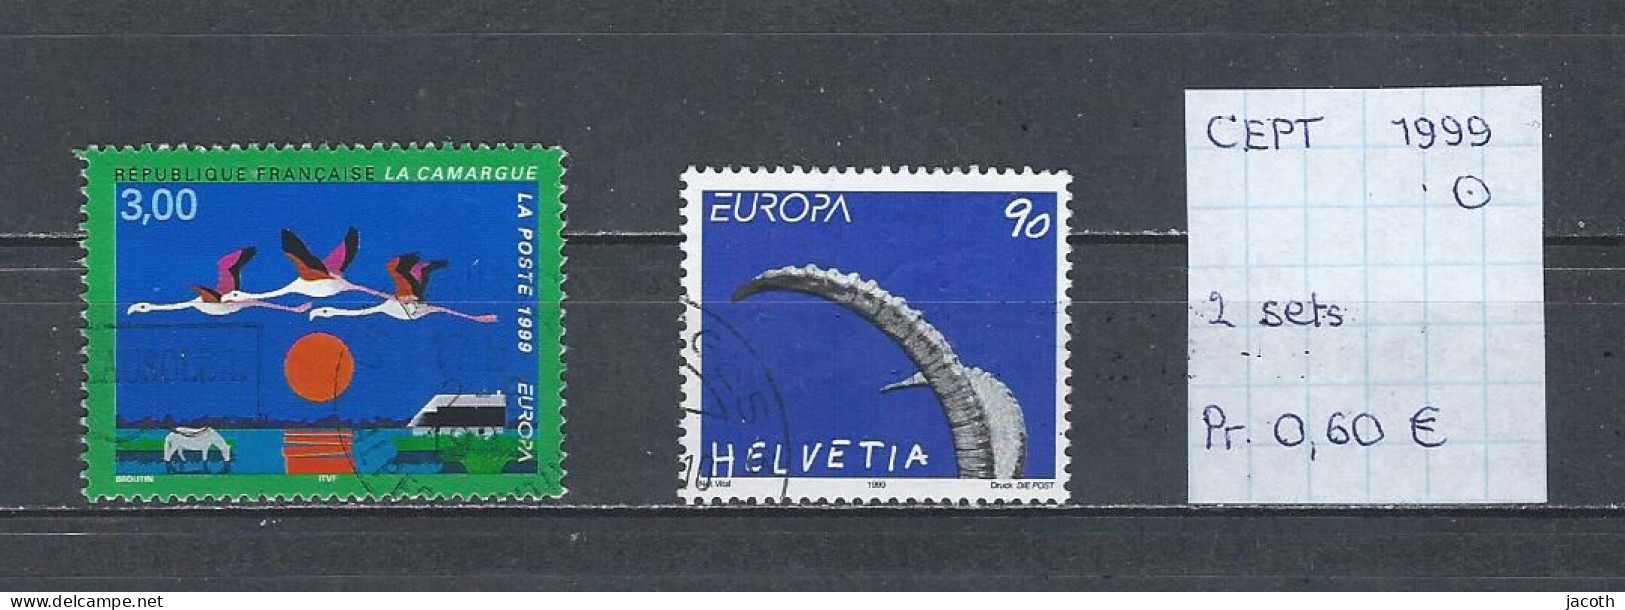 (TJ) Europa CEPT 1999 - 2 Sets (gest./obl./used) - 1999